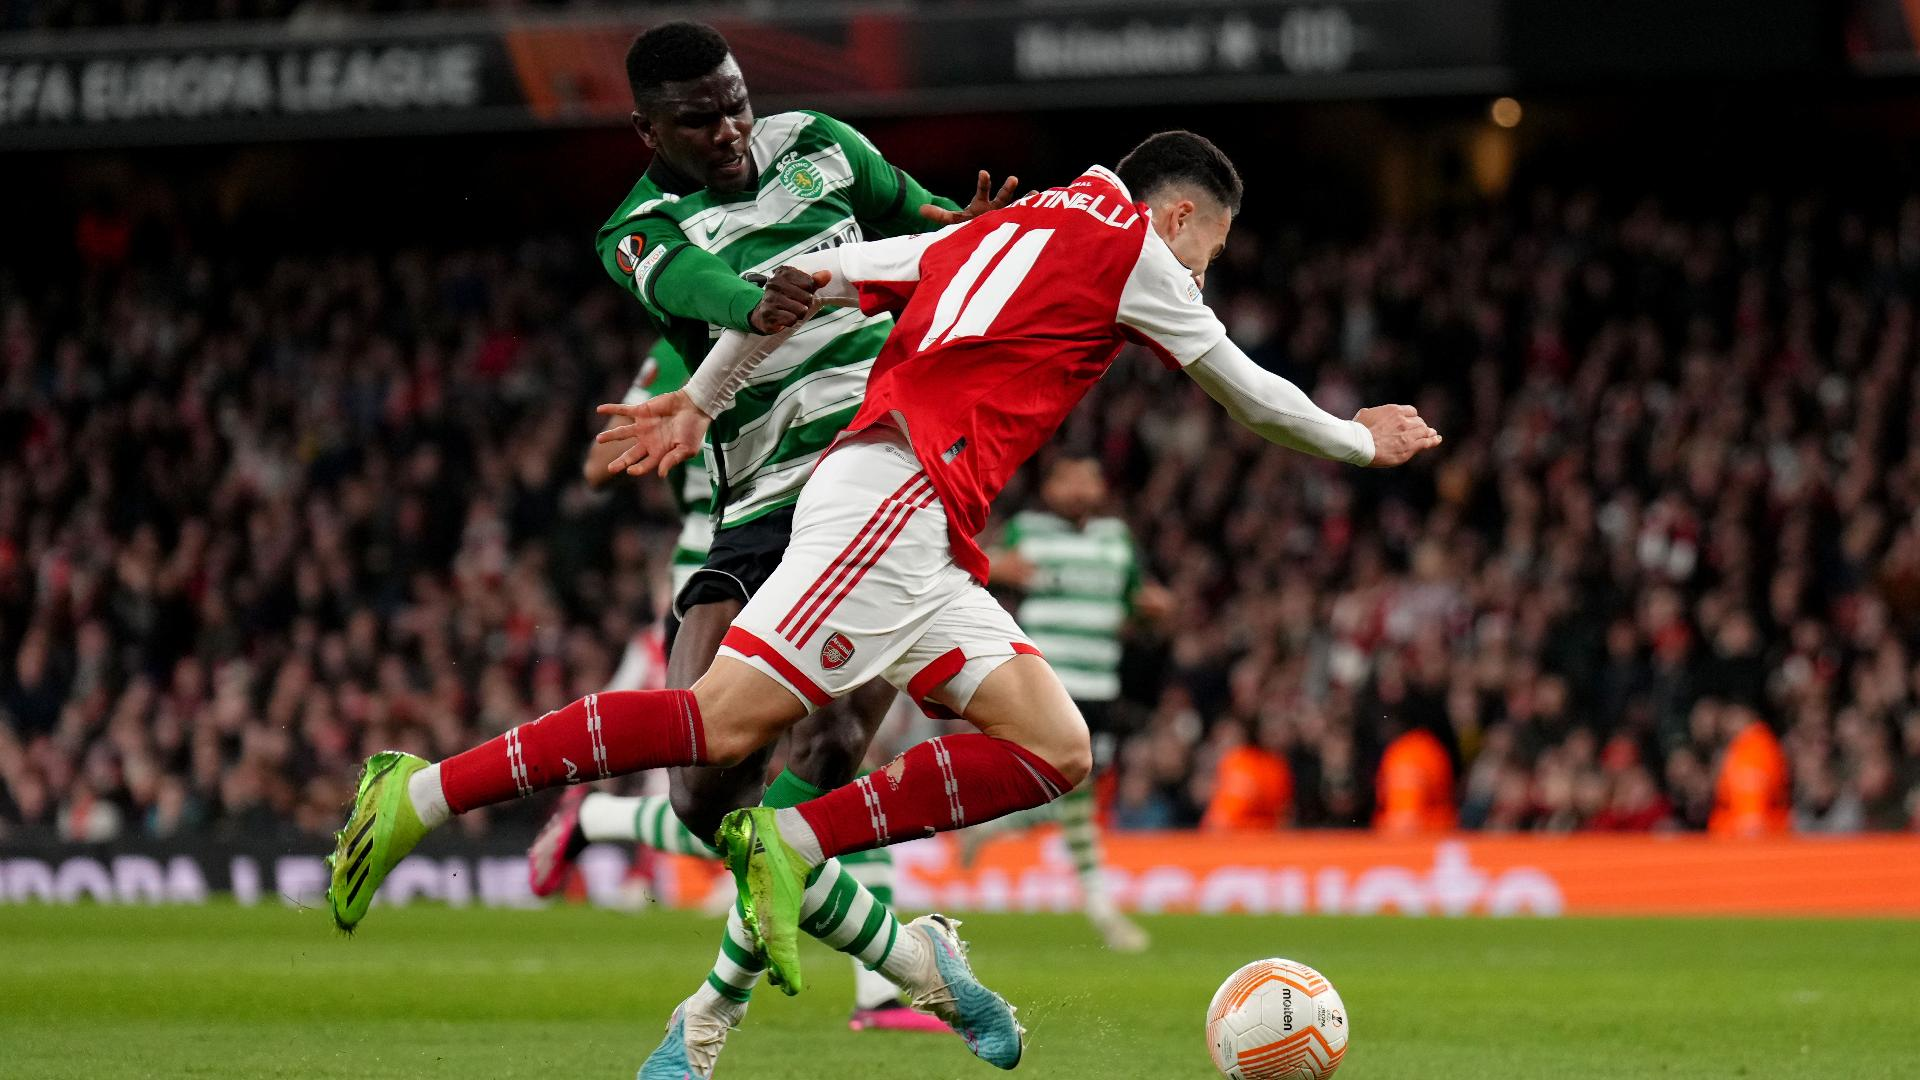 John Walton/PA : Arsenal’s Gabriel Martinelli (right) and Sporting’s Ousmane Diomande battle for the ball.